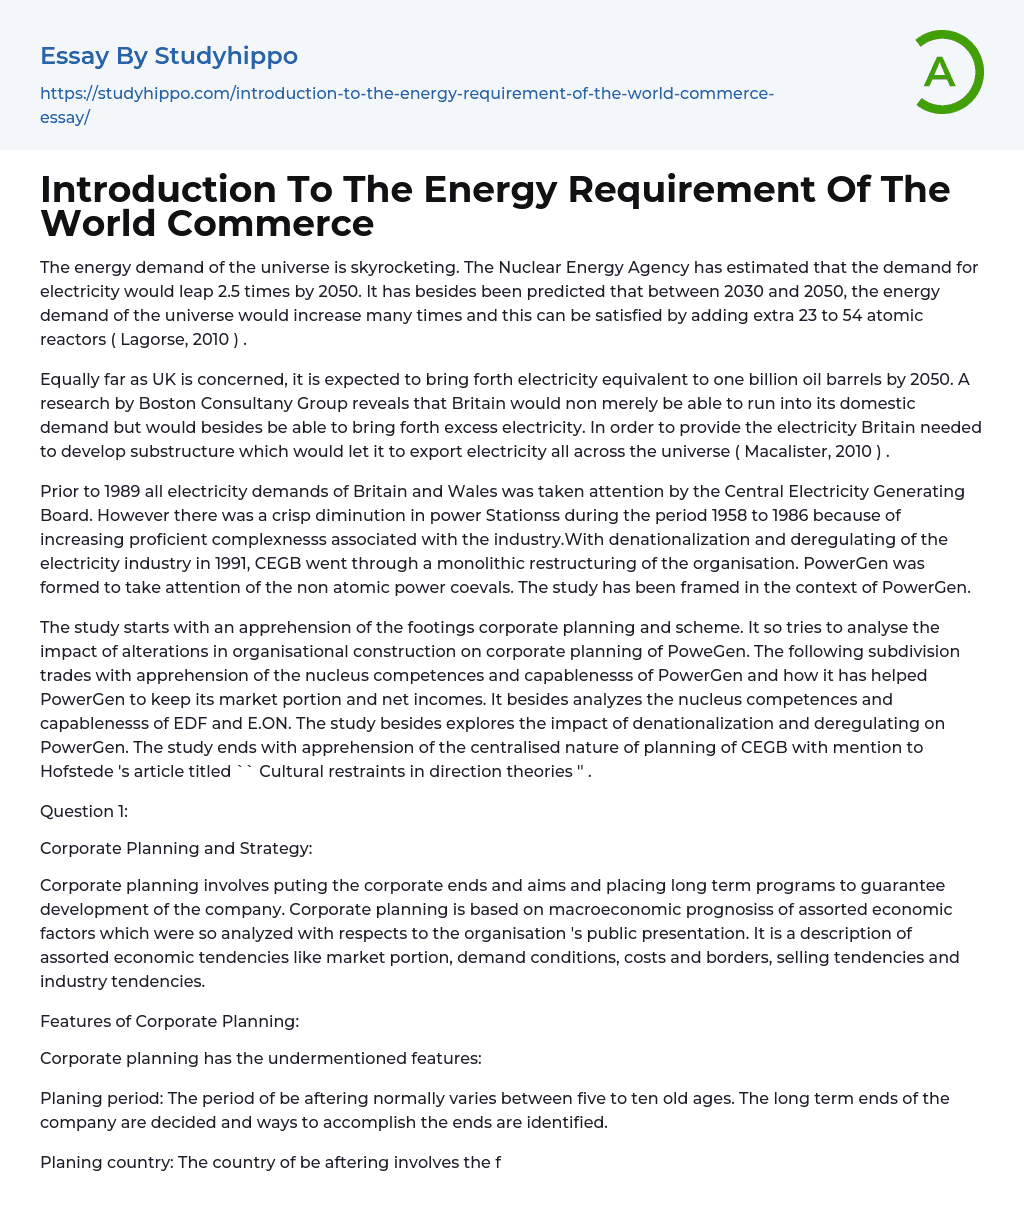 Introduction To The Energy Requirement Of The World Commerce Essay Example